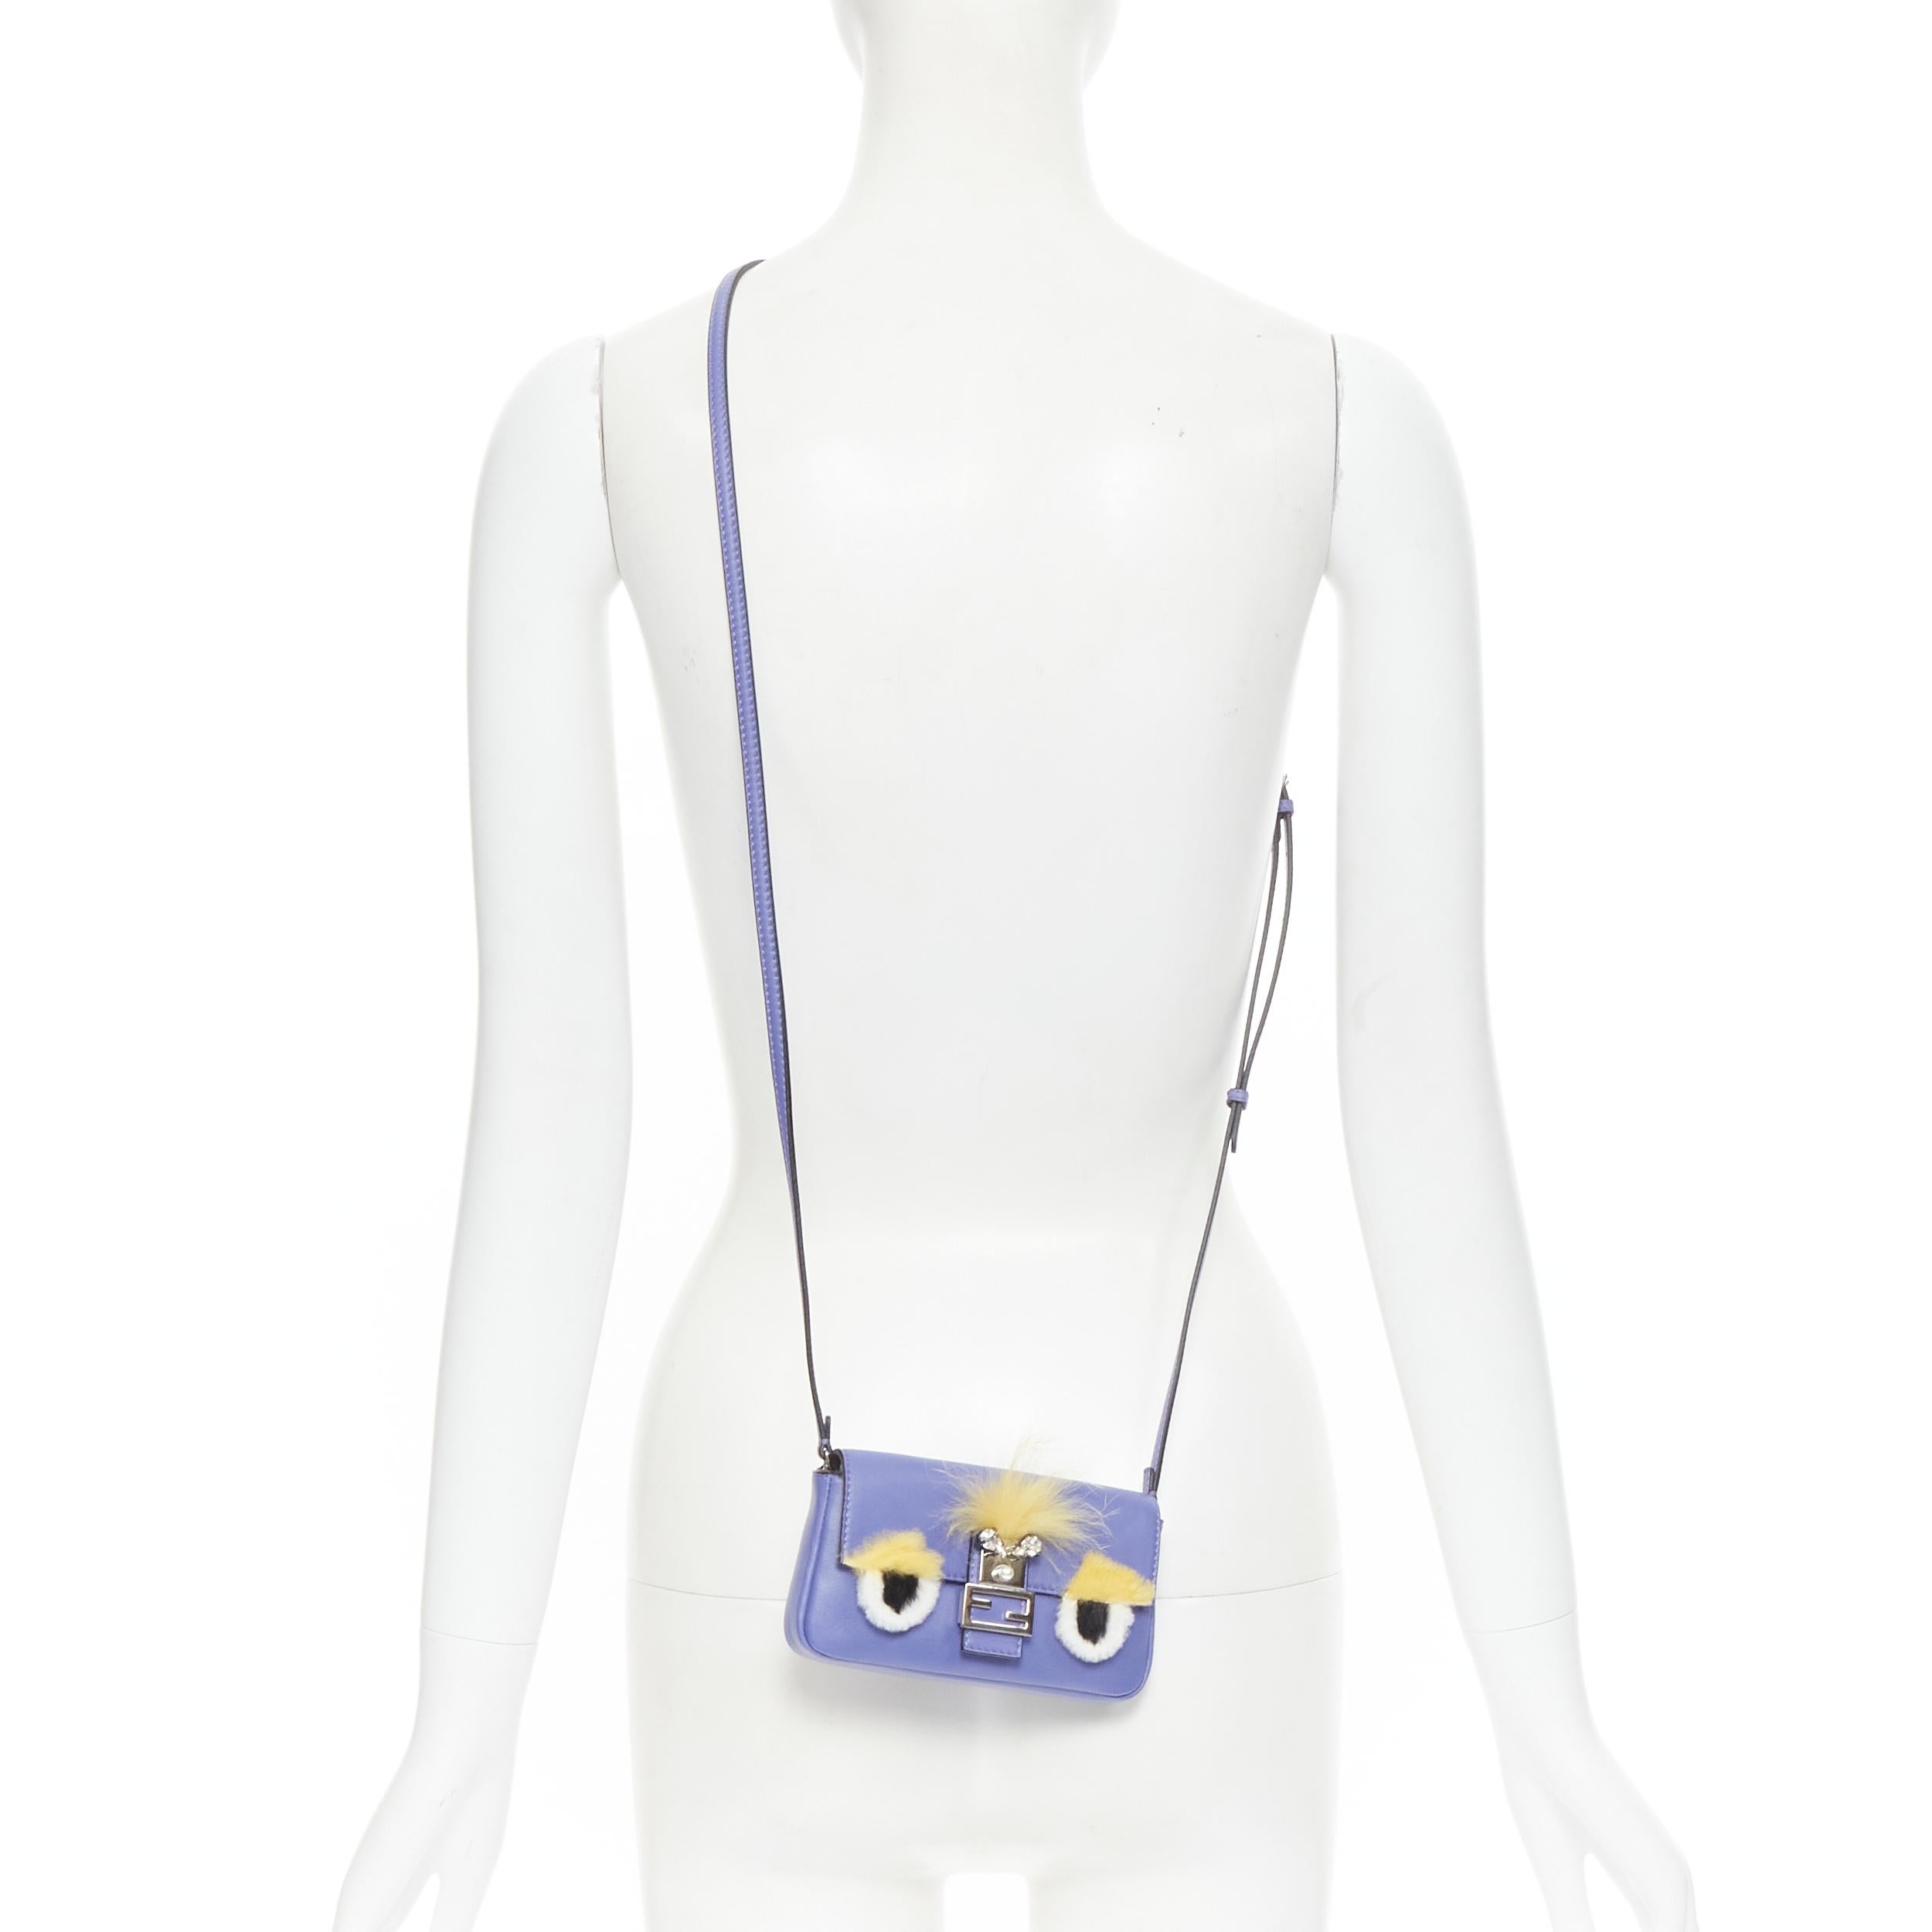 FENDI Micro Baguette Monster Bug furry eye crystal FF flap purple crossbody bag 
Reference: TGAS/B01637
Brand: Fendi 
Model: Micro Baguette Buggie bag 
Material: Leather 
Color: Blue 
Pattern: Solid 
Closure: Magnet 
Extra Detail: Blue/purple